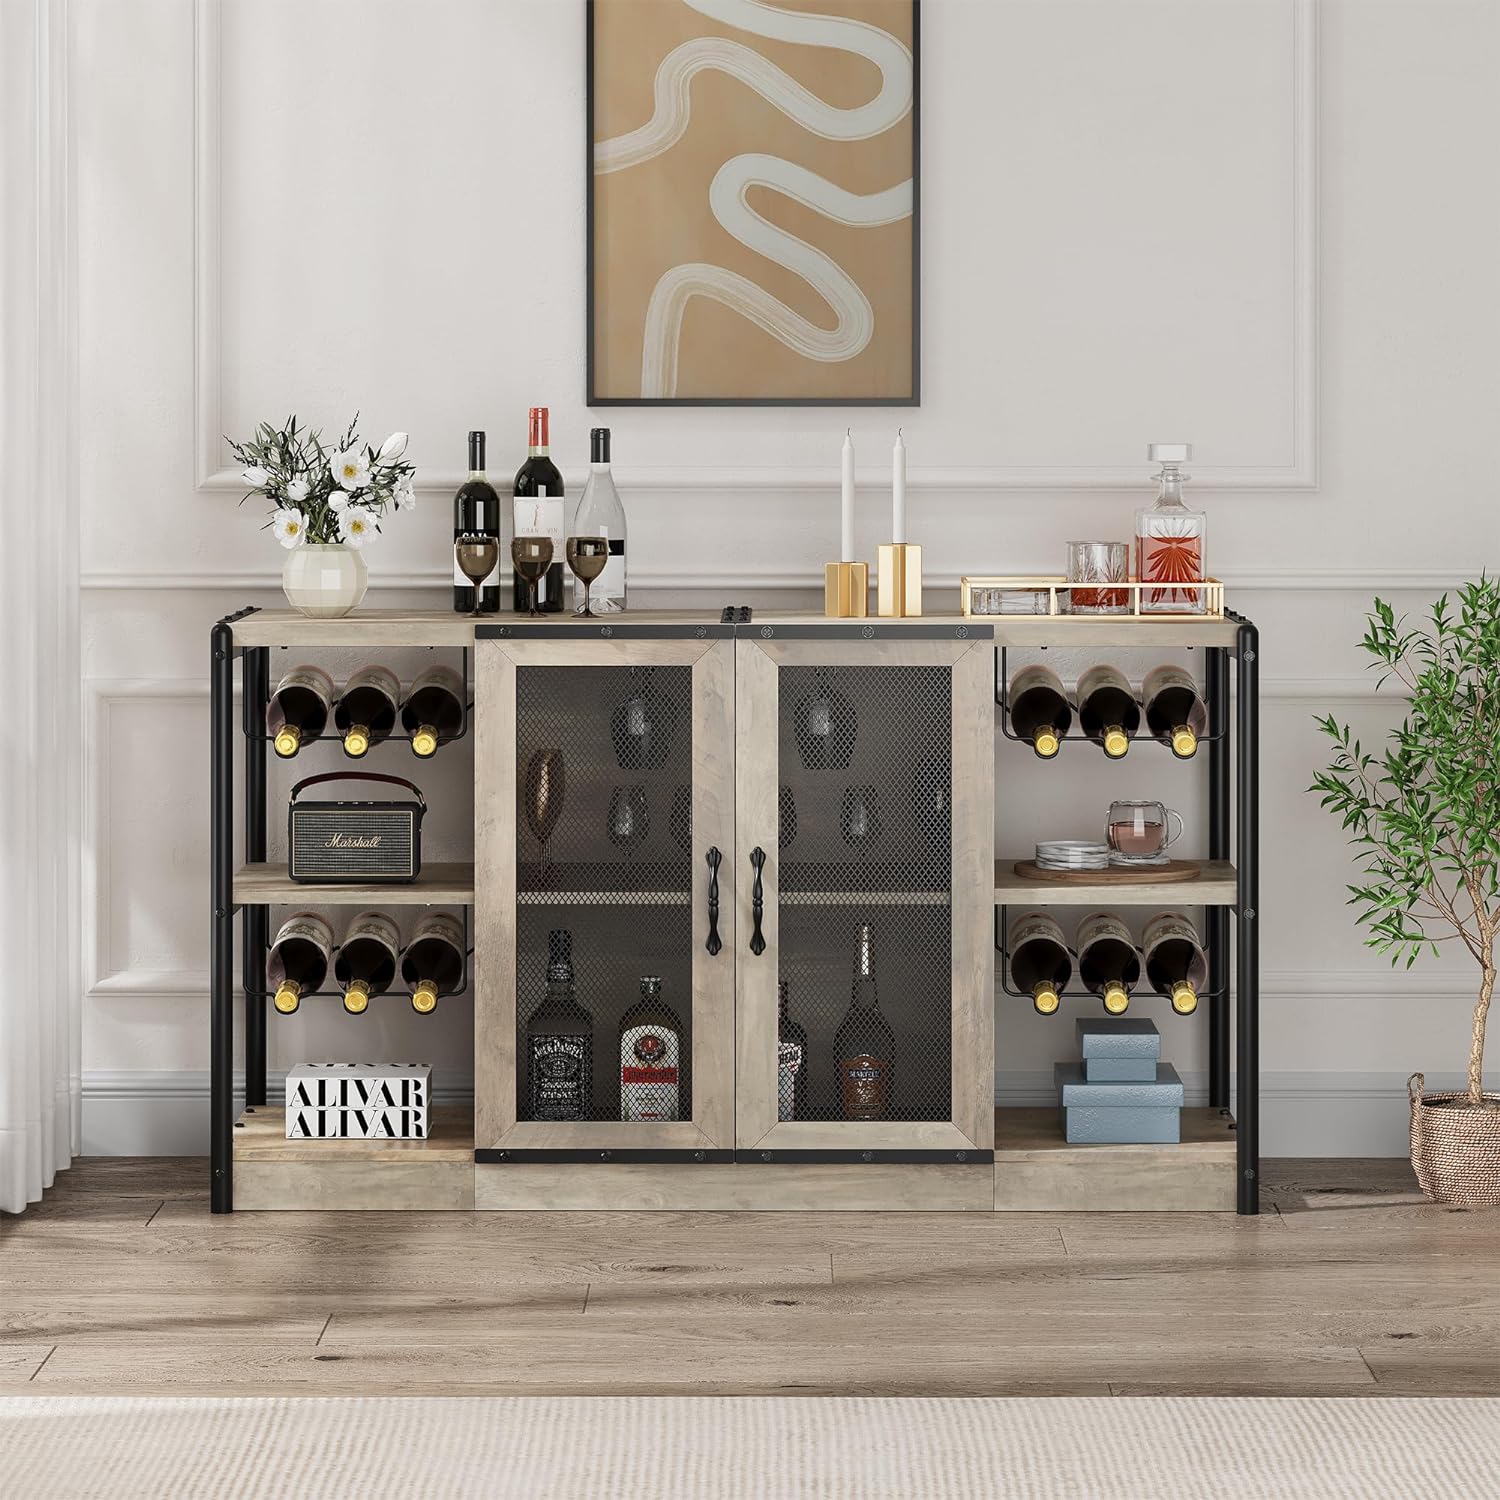 The New Age Home bar cabinet is more than just a place to store your drinks, it' a reflection of the exquisite life in your home. We offer bar cabinets in a variety of styles and sizes to suit your unique needs.